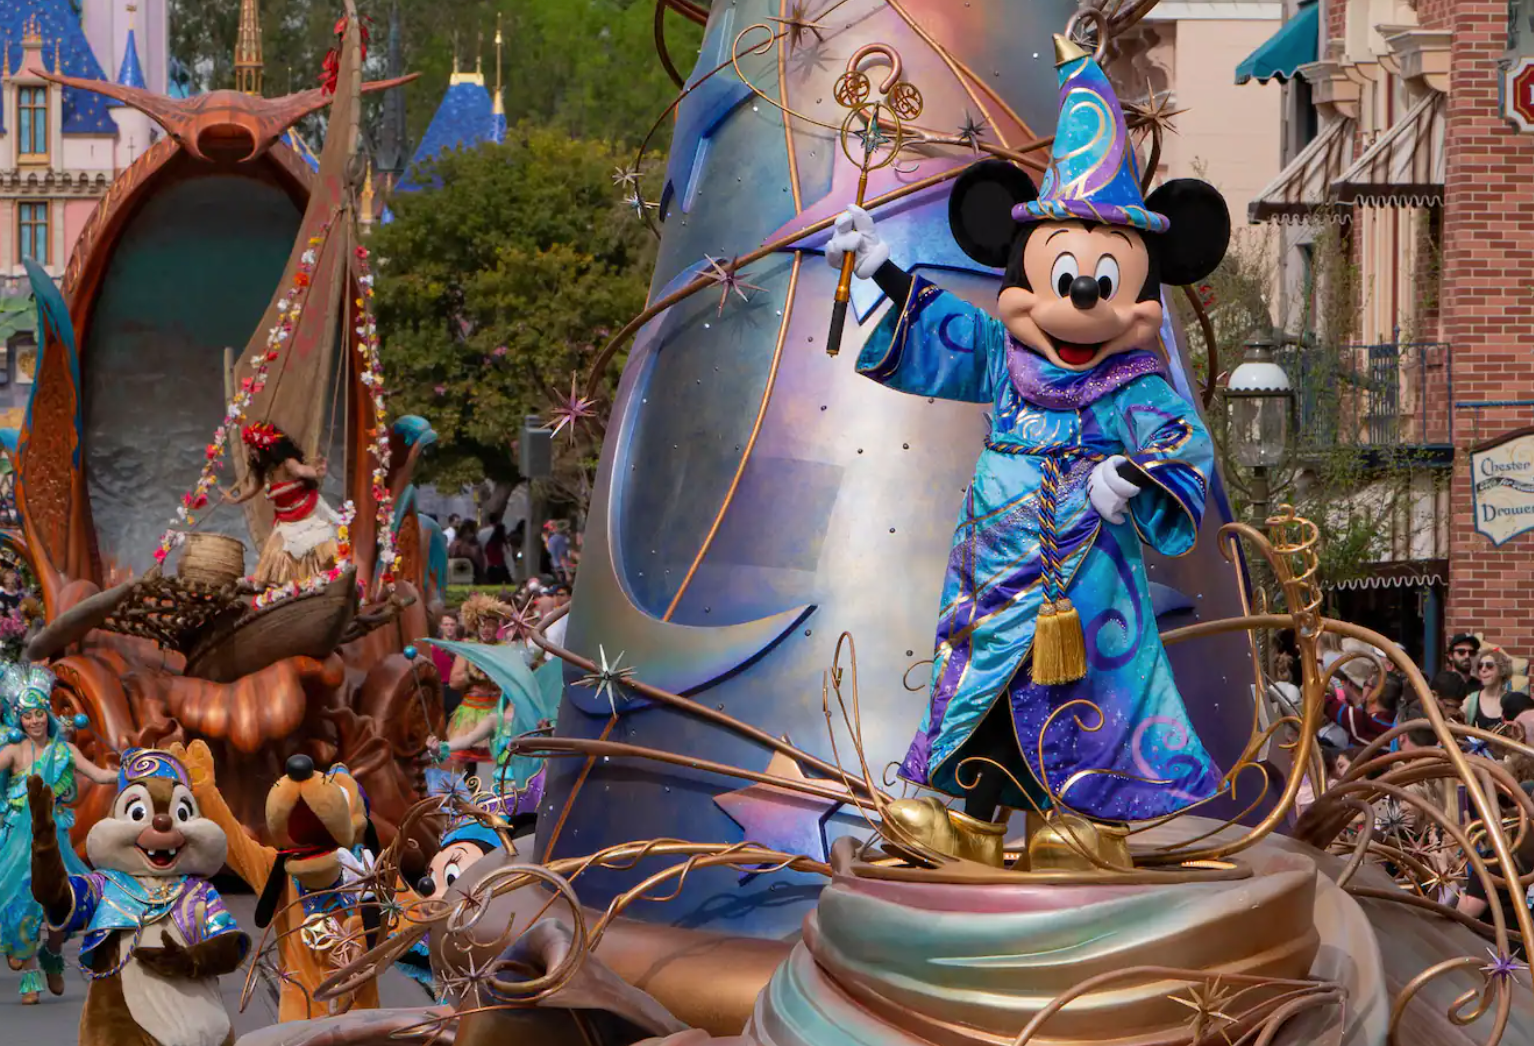 Disney Character Suffers Wardrobe Malfunction During Parade